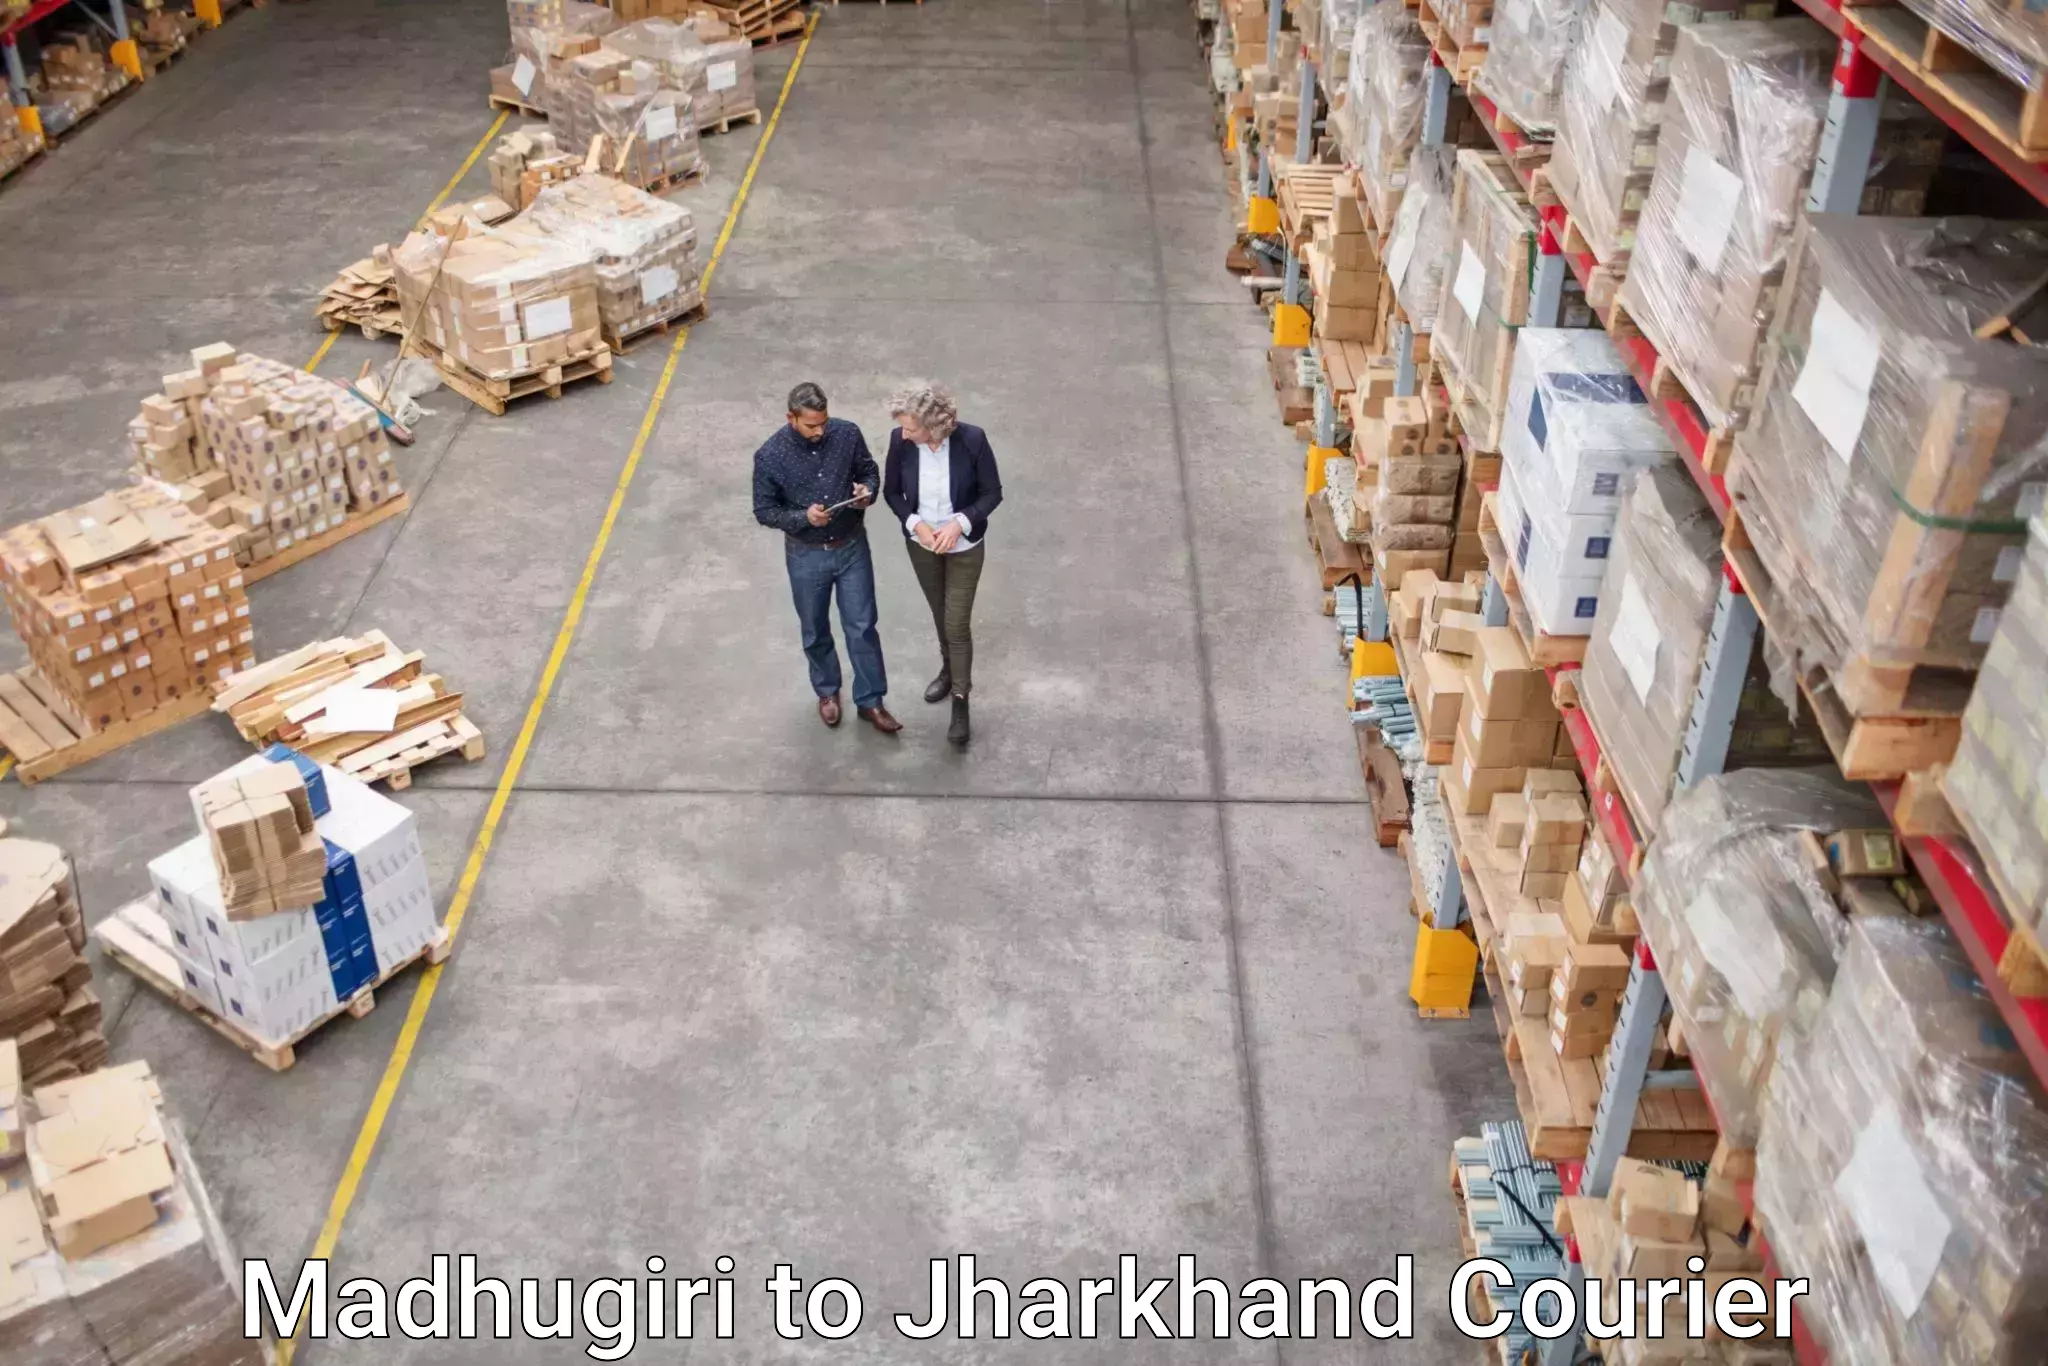 Courier service innovation Madhugiri to Dhanbad